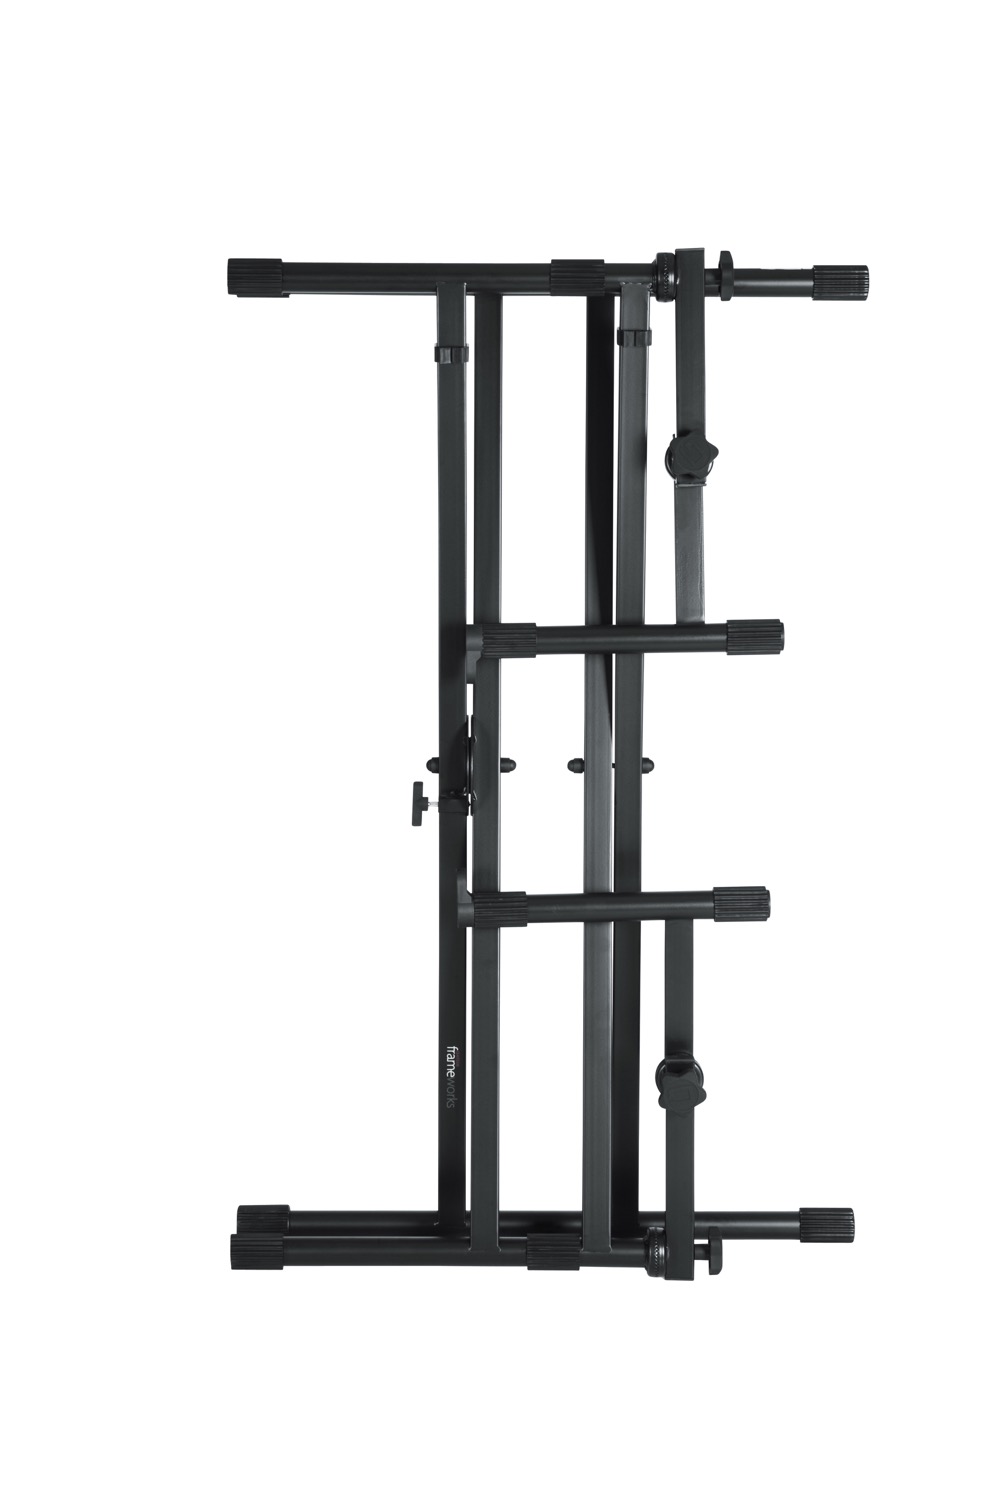 Deluxe 2 Tier “X” Style Keyboard Stand-GFW-KEY-5100X